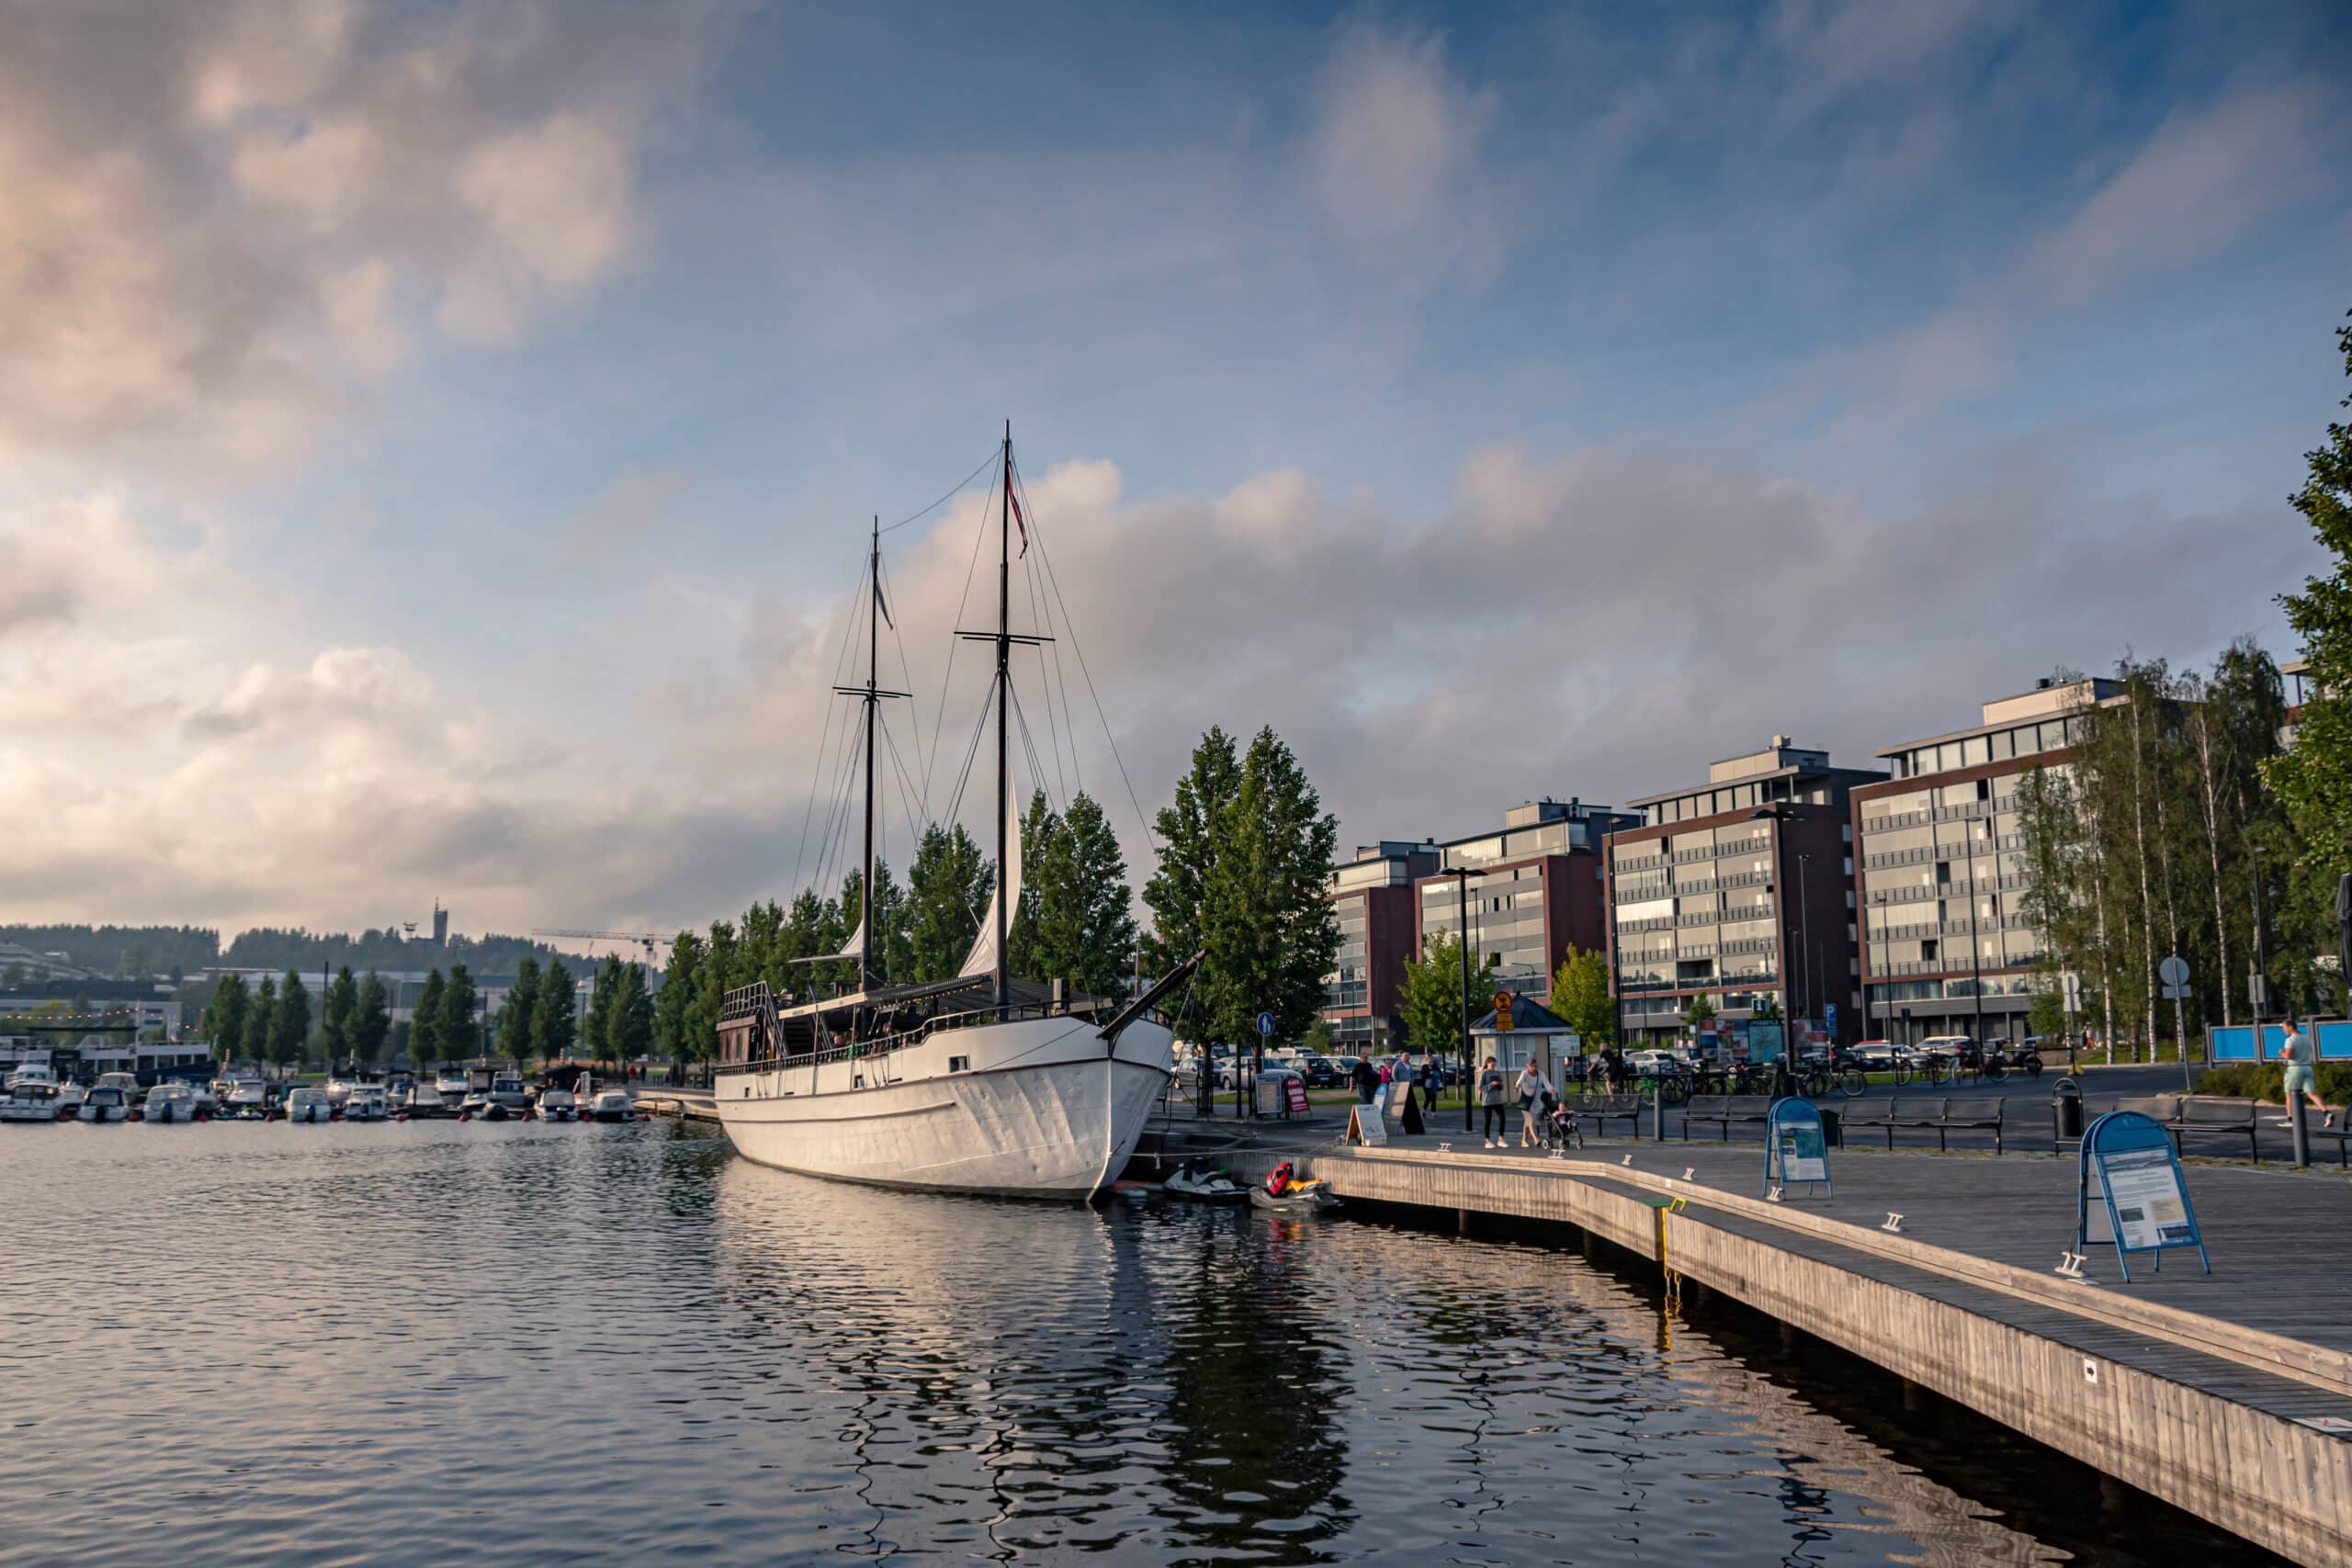 Jyväskylä harbour. Centre of the city and new apartment buildings of Lutakko area are visible in the background.